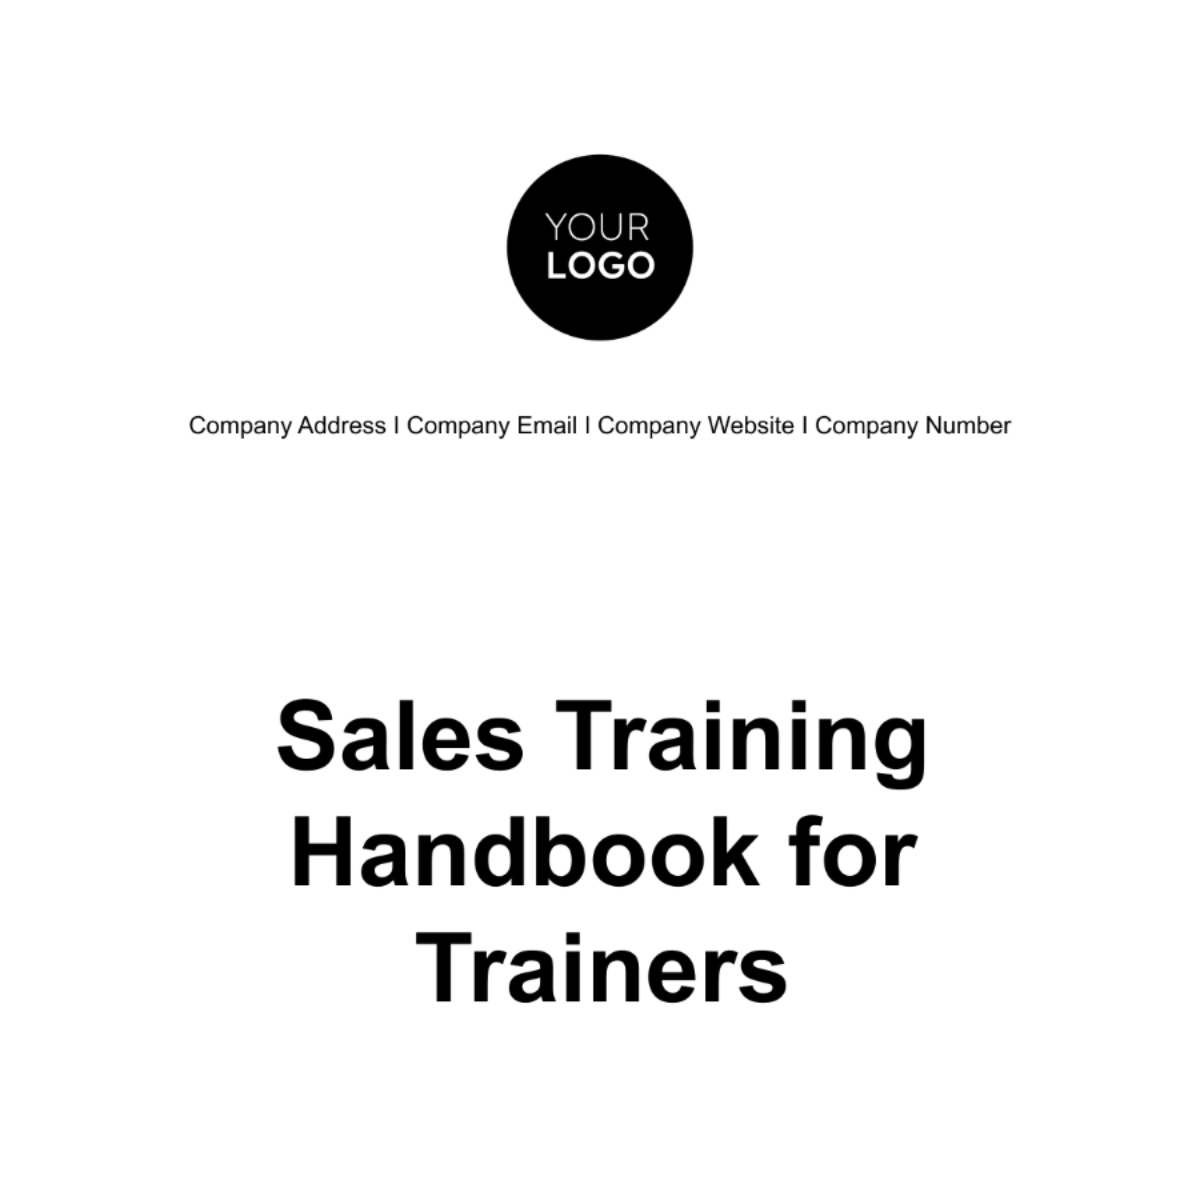 Sales Training Handbook for Trainers Template